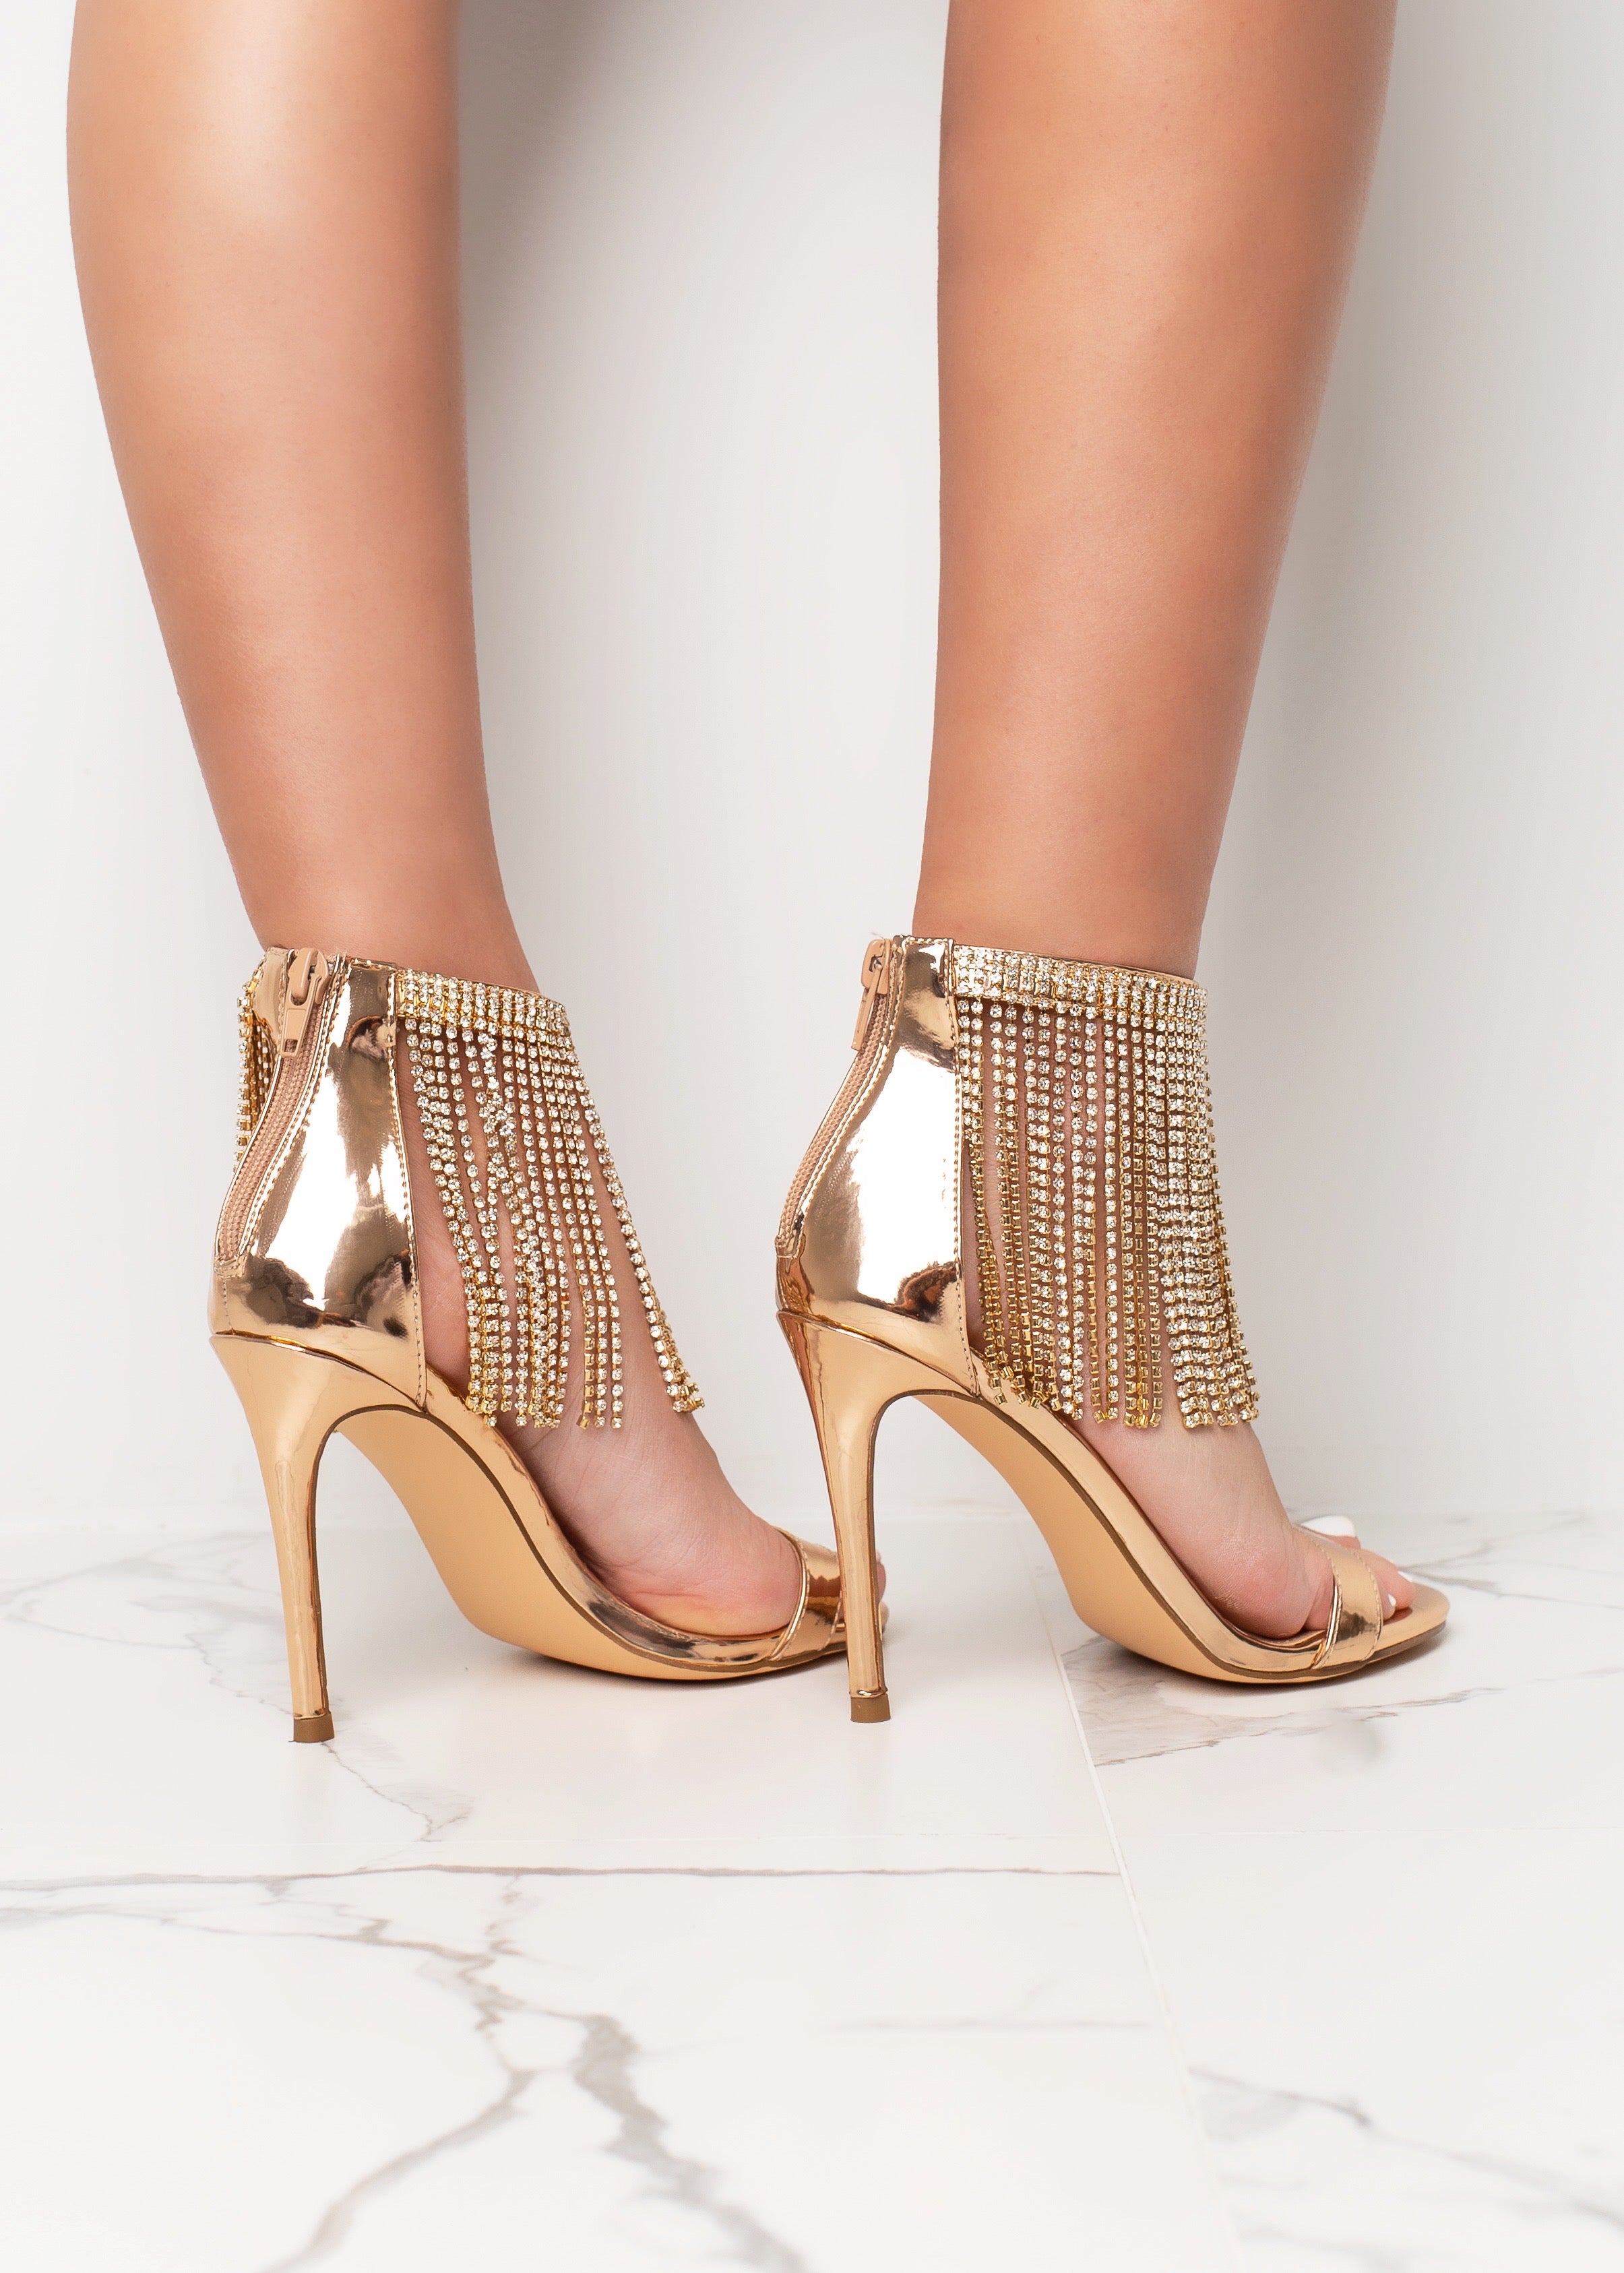 rose gold heels with diamonds